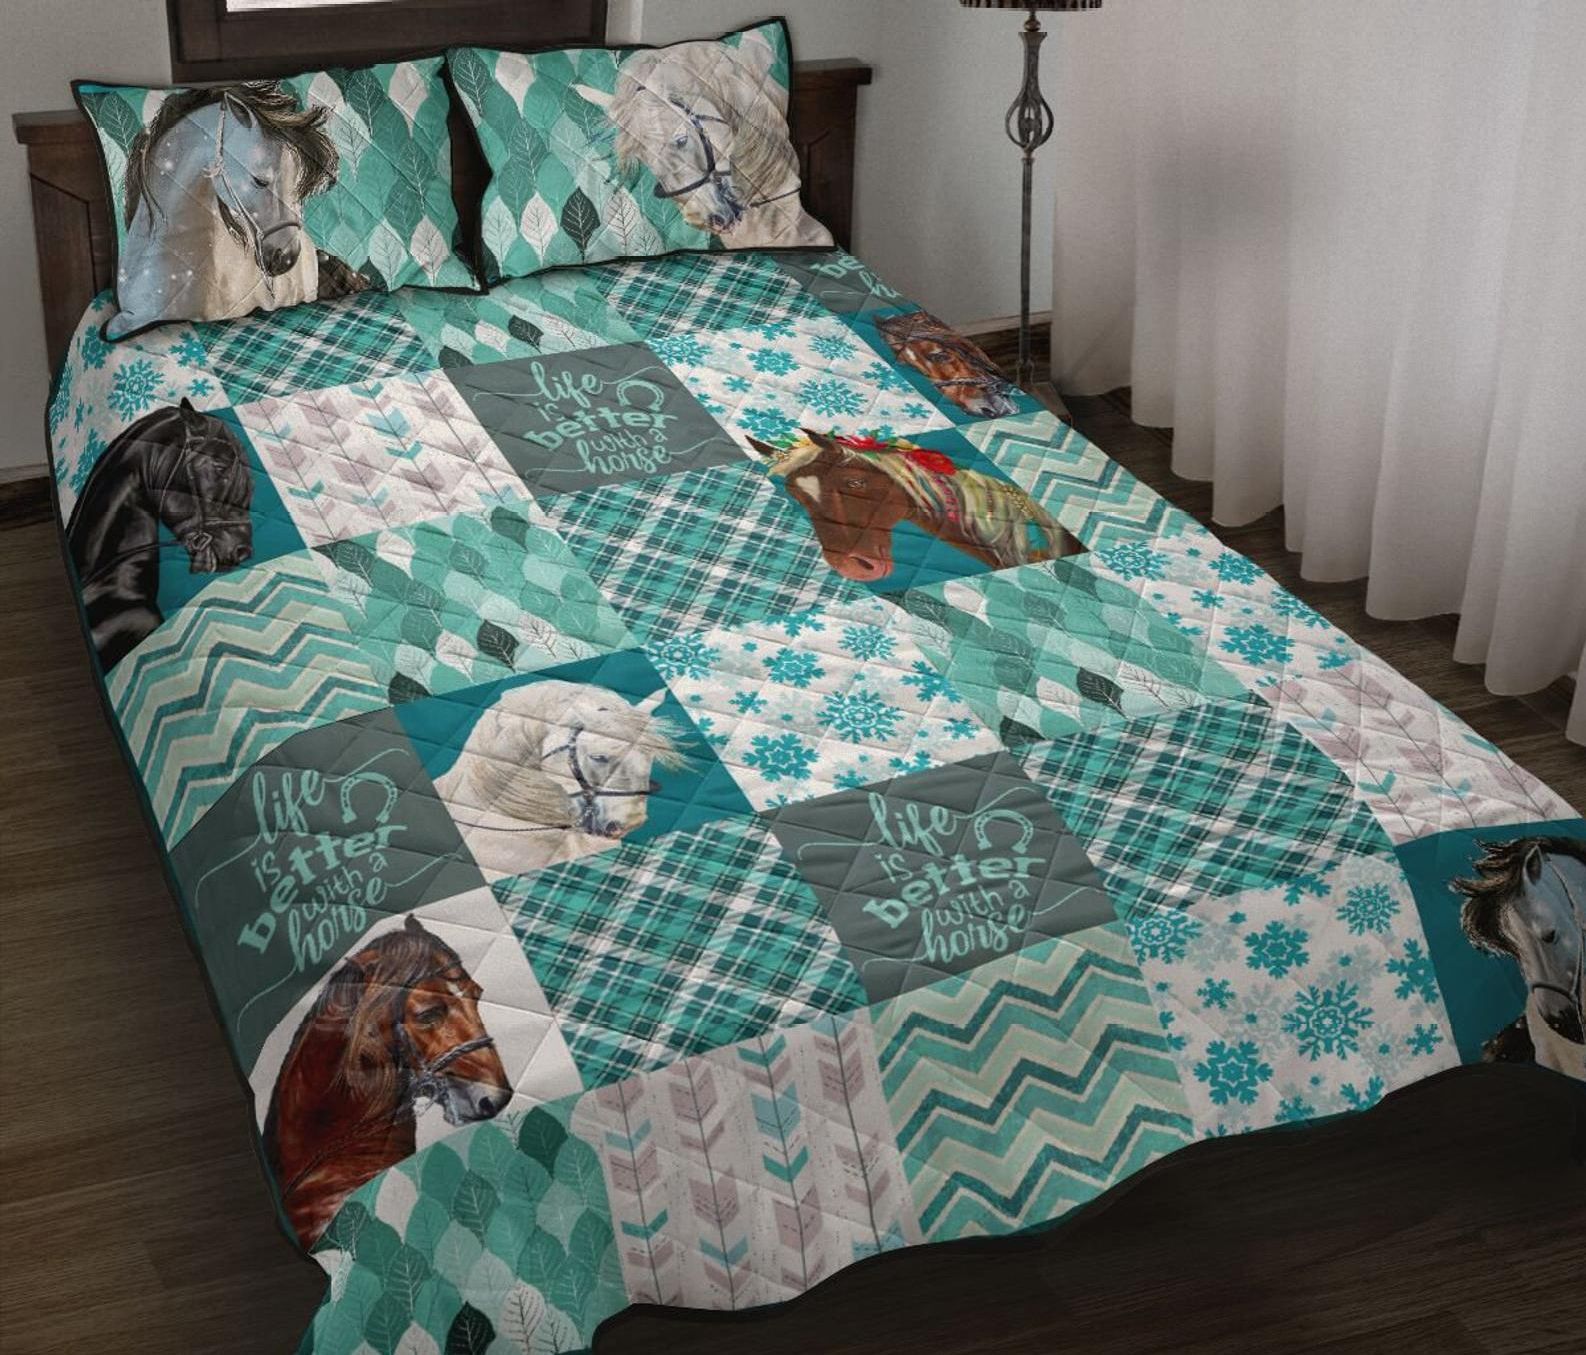 Horse Life Is Better With Horse Quilt Bedding Set Cotton Bed Sheets Spread Comforter Duvet Cover Bedding Sets